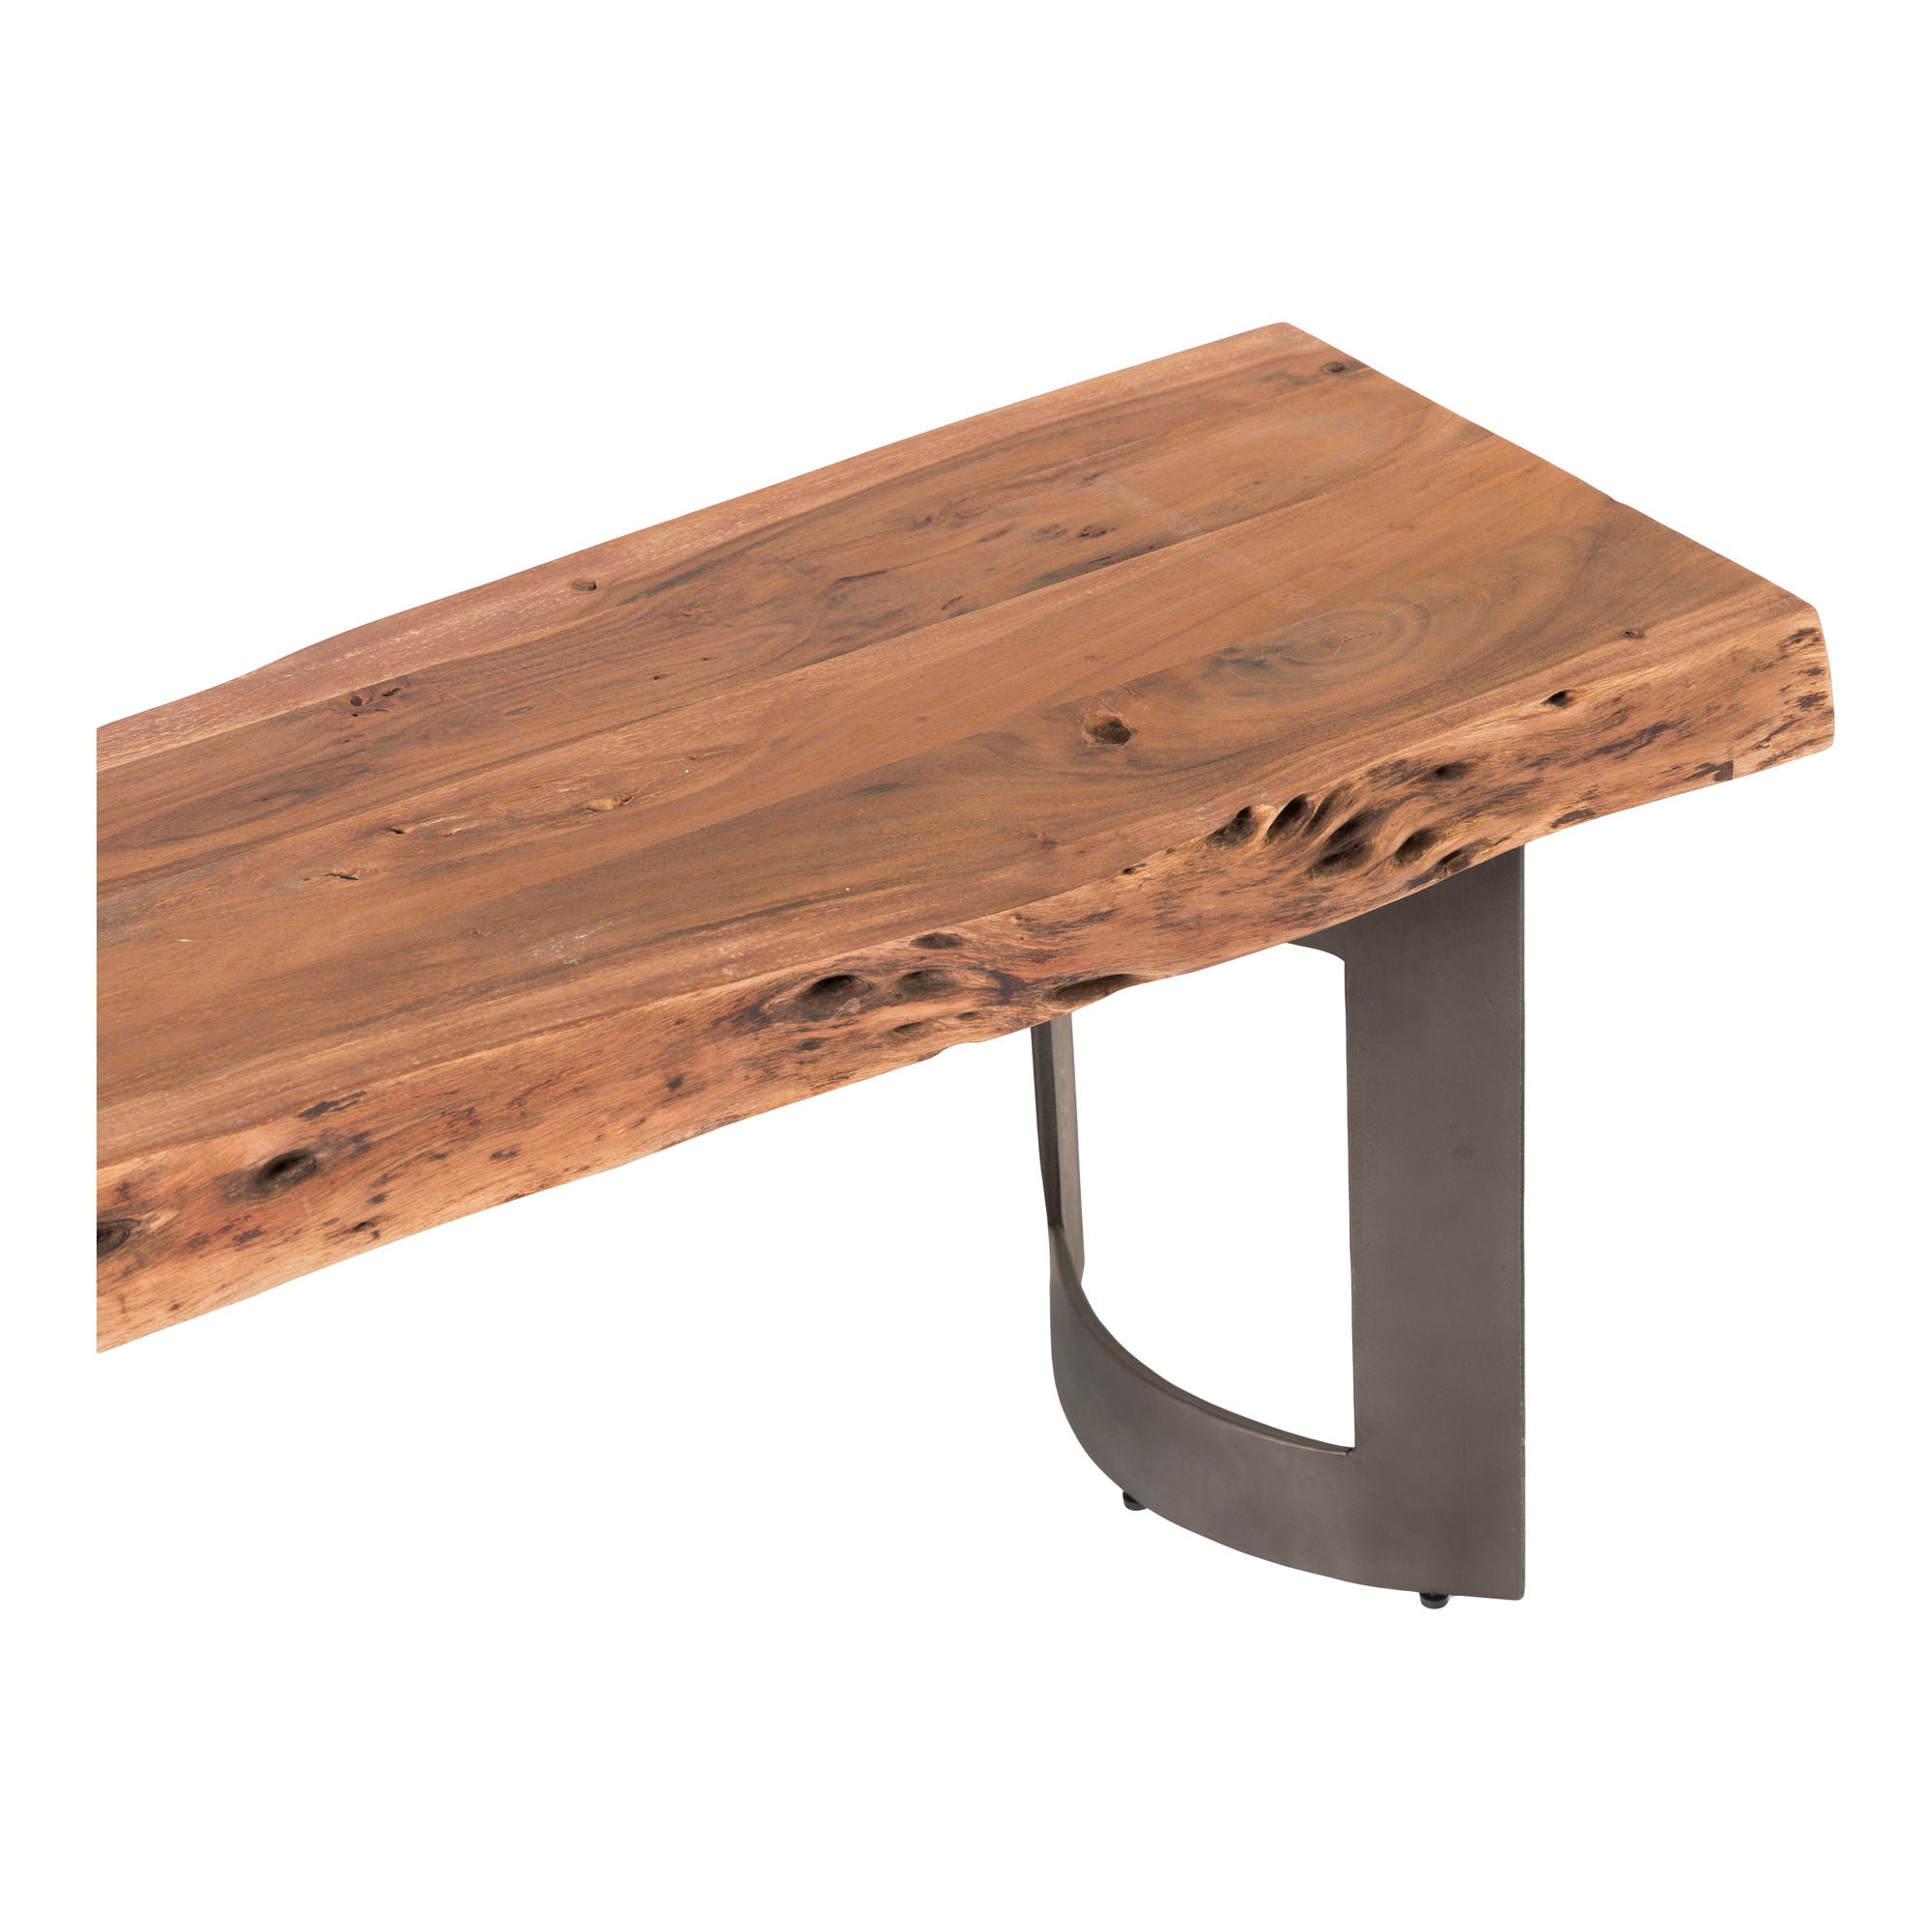 Bent - Bench Small - Natural Stain